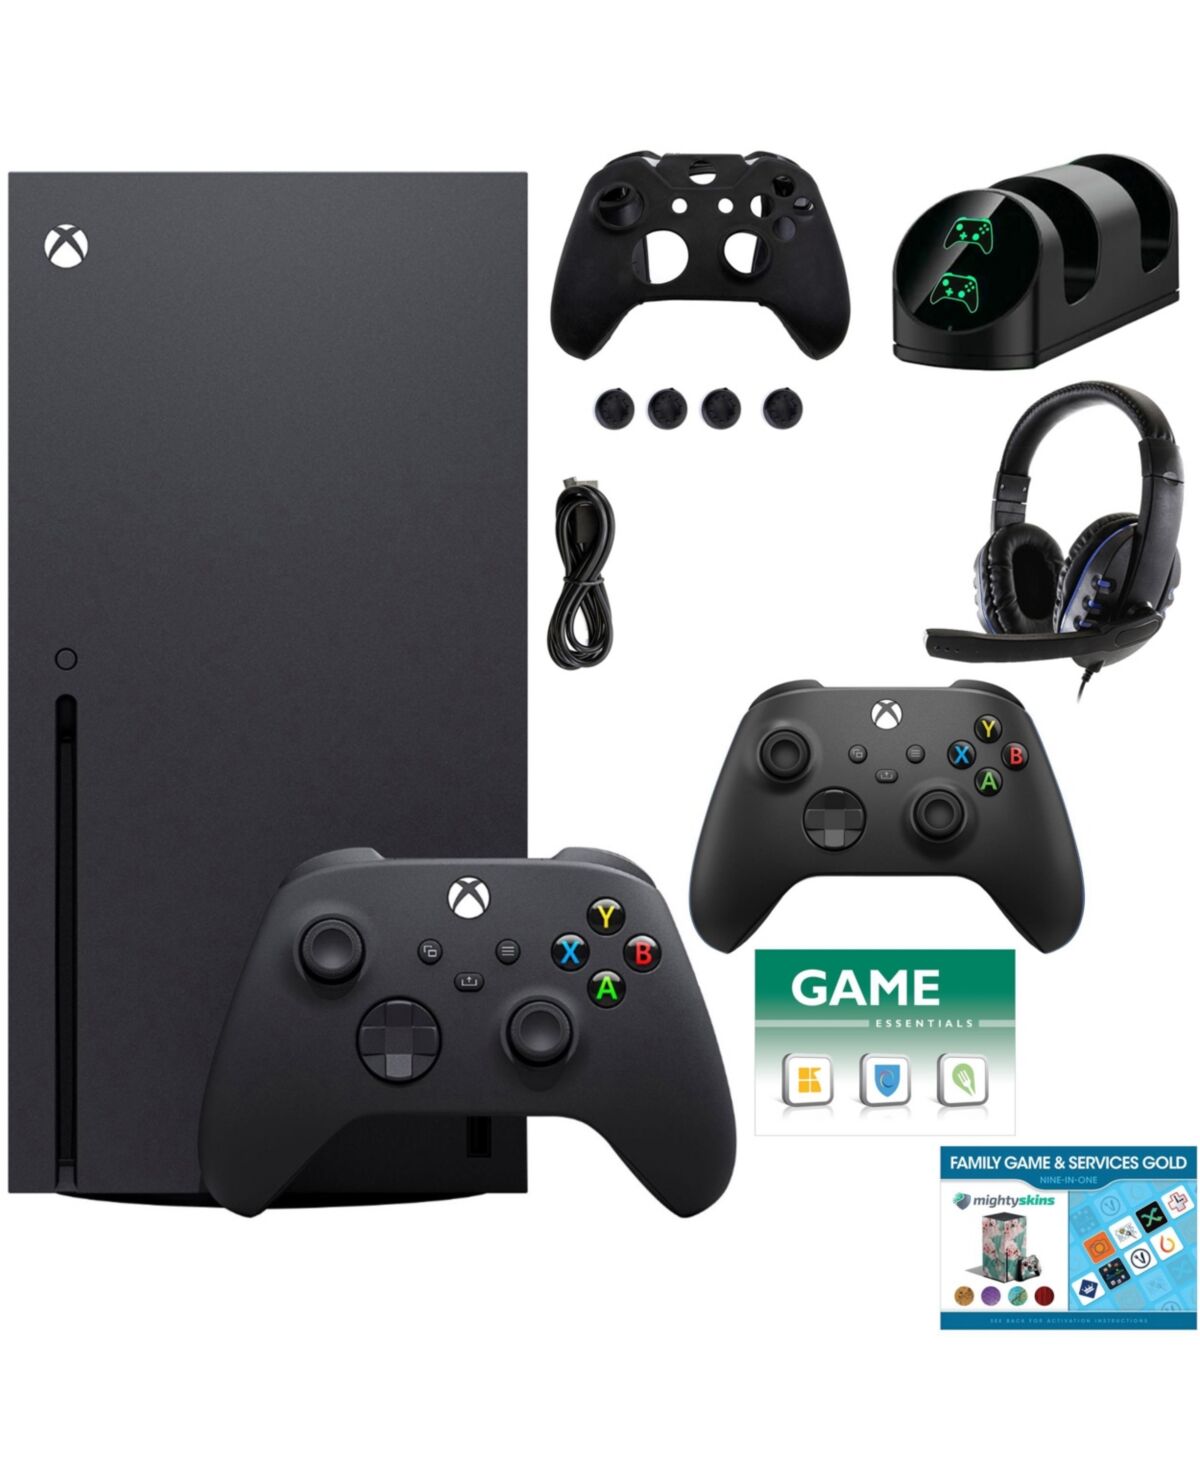 Xbox Series X 1TB Console with Extra Black Controller Accessories Kit and 2 Vouchers - Black